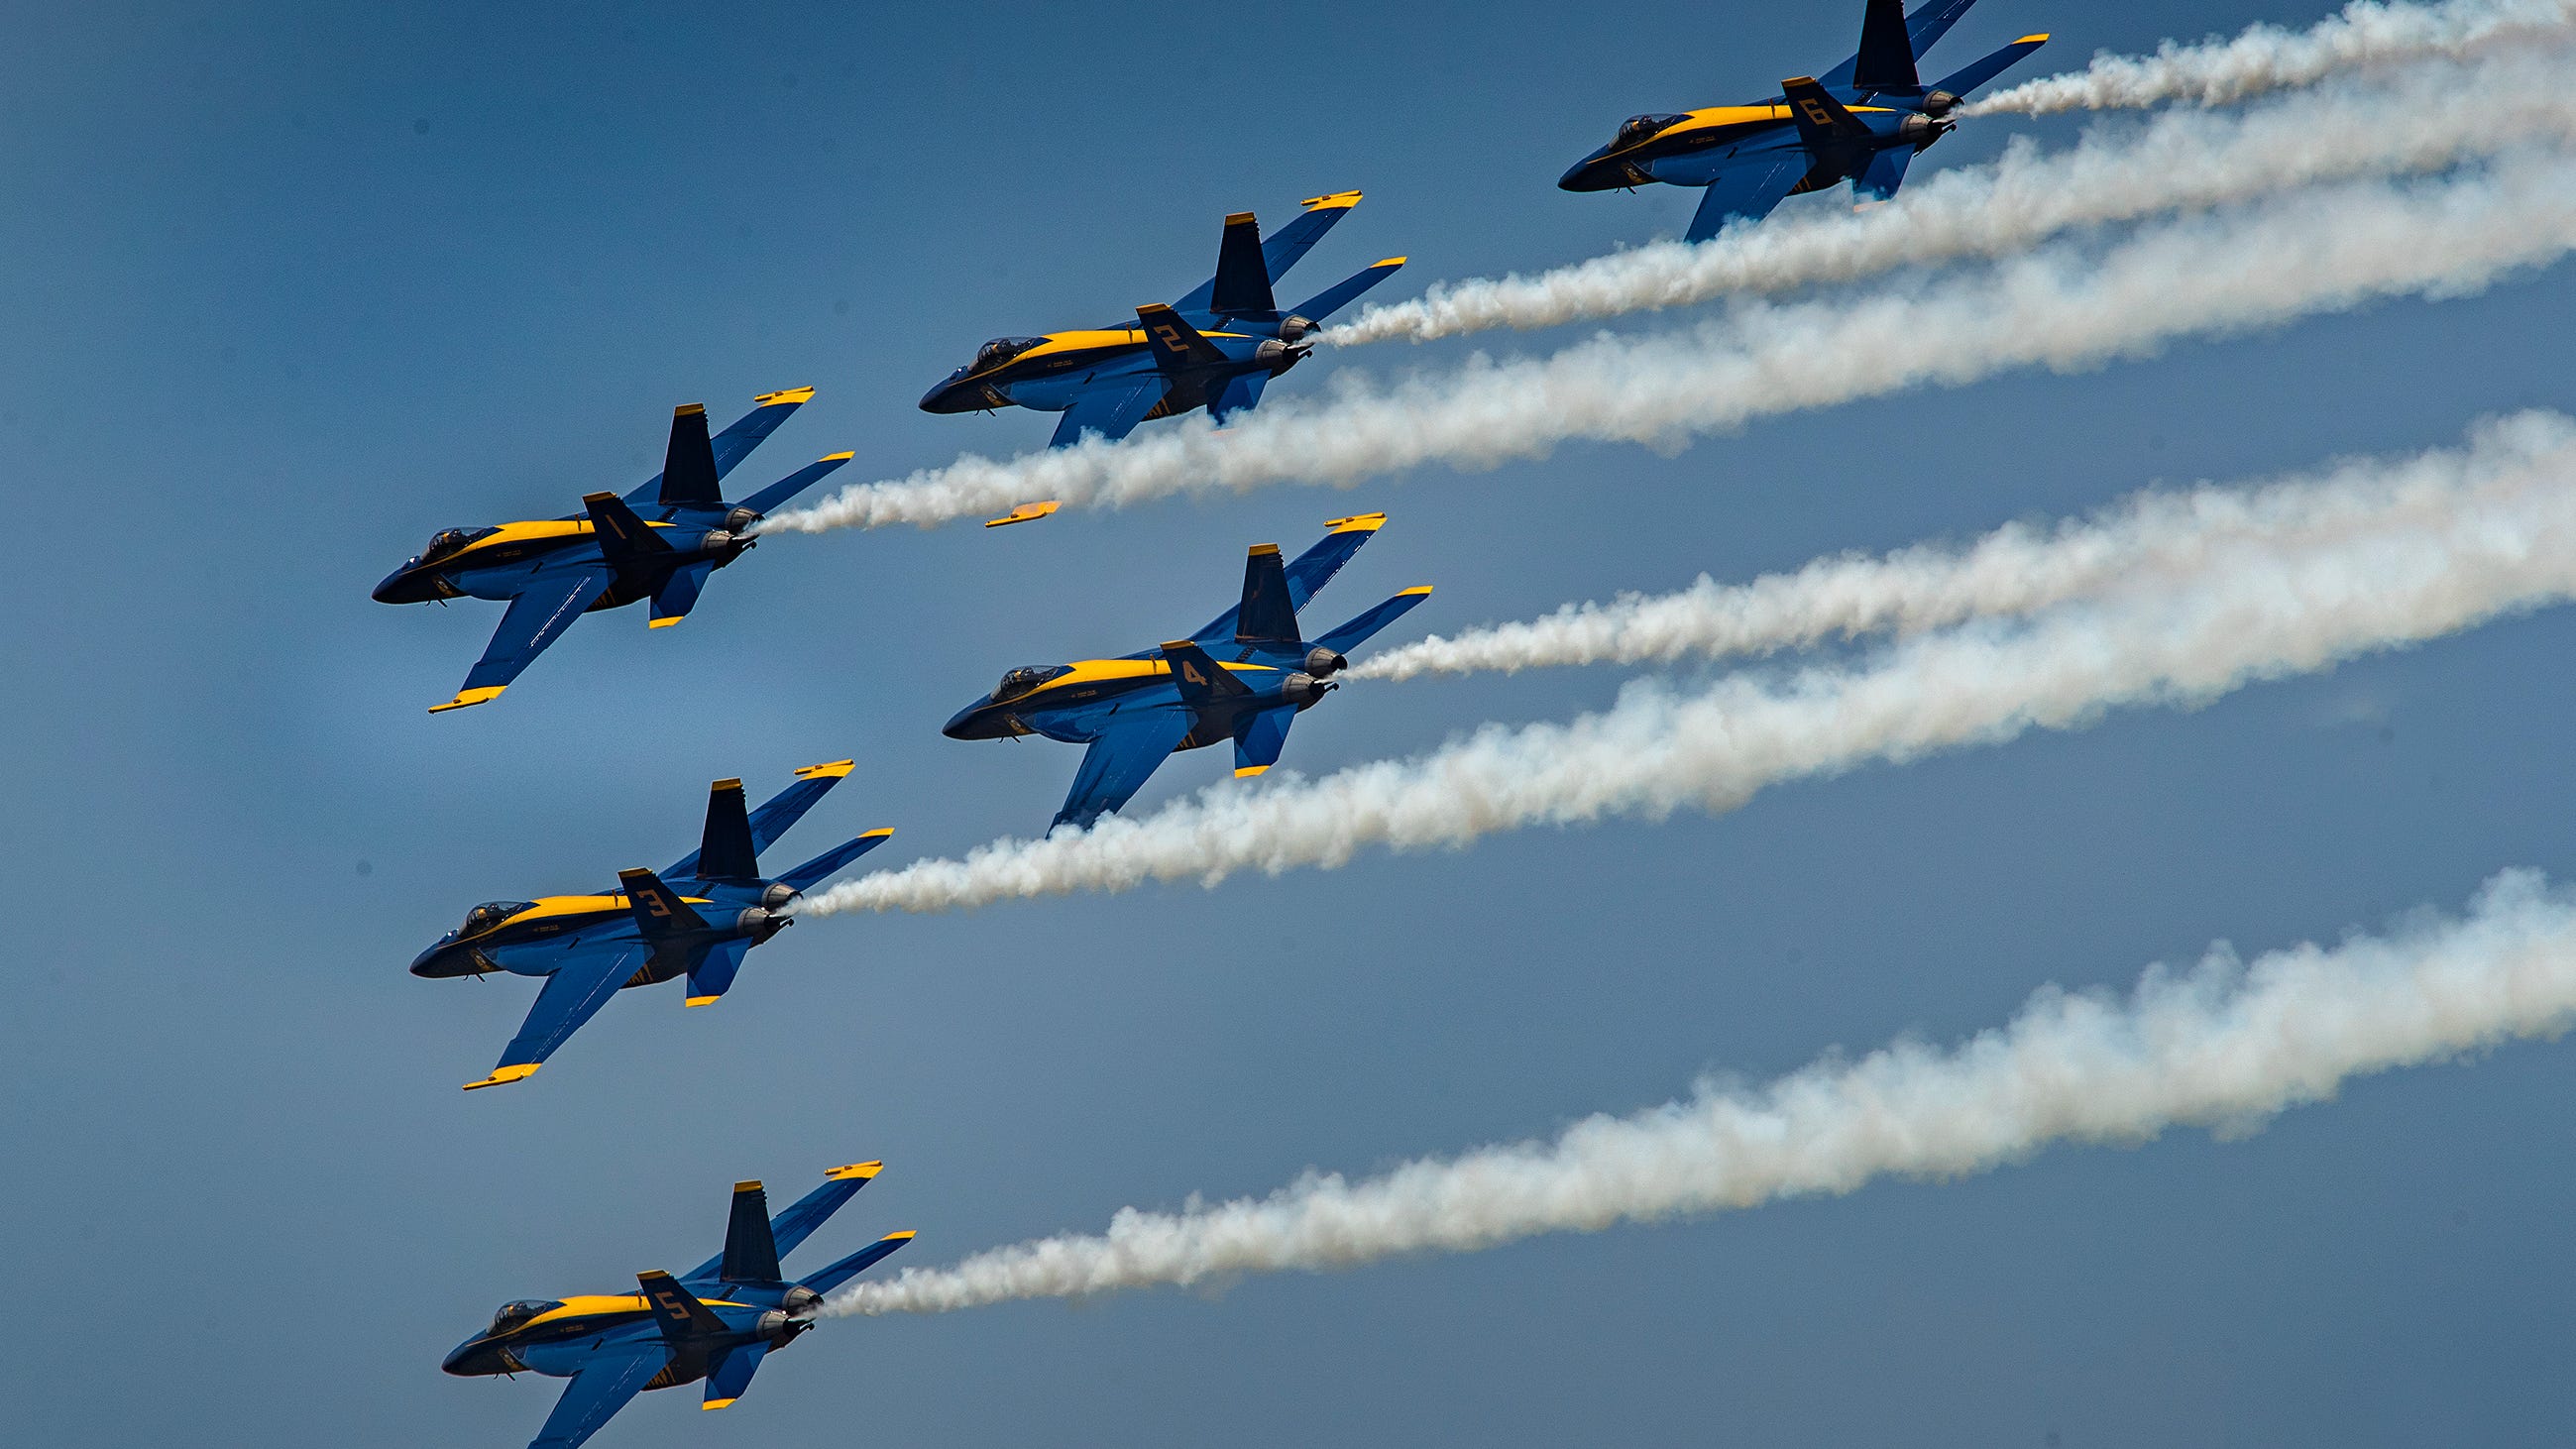 Melbourne's air show faces obstacle in getting 67,500 county grant